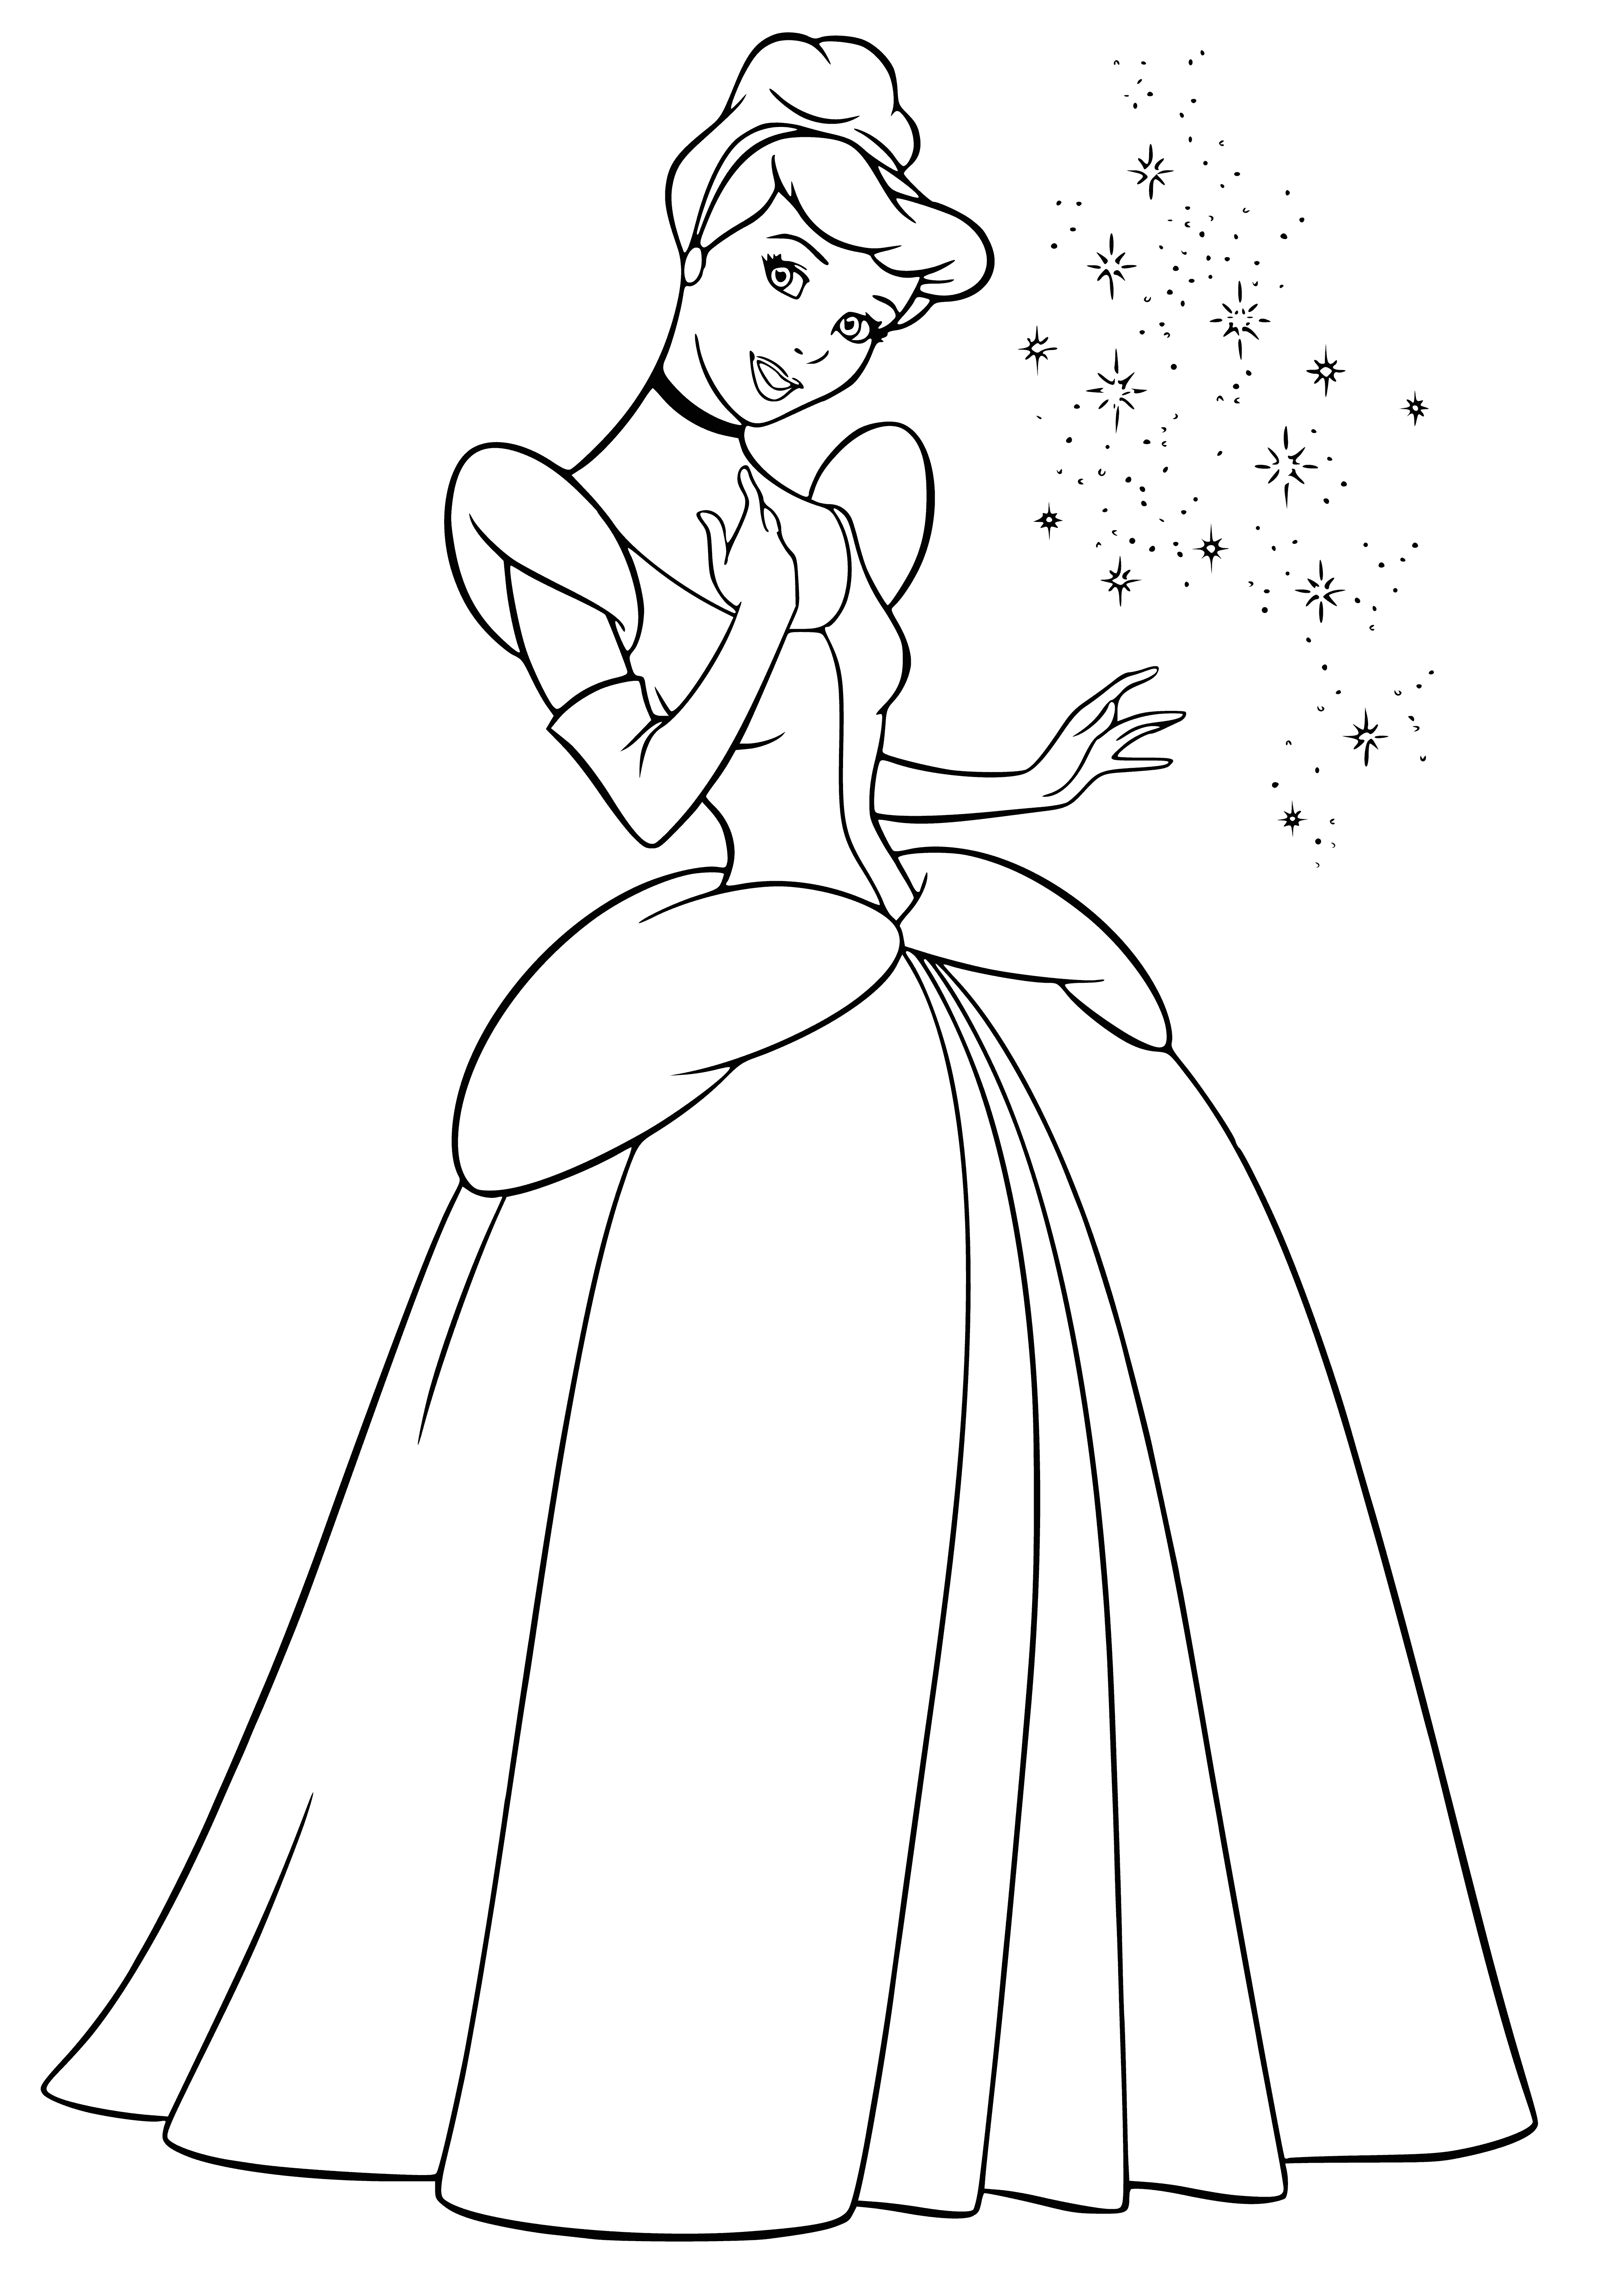 coloring page: Cinderella, a beautiful princess in a pink dress, stands happily in front of a castle with her arms outstretched.